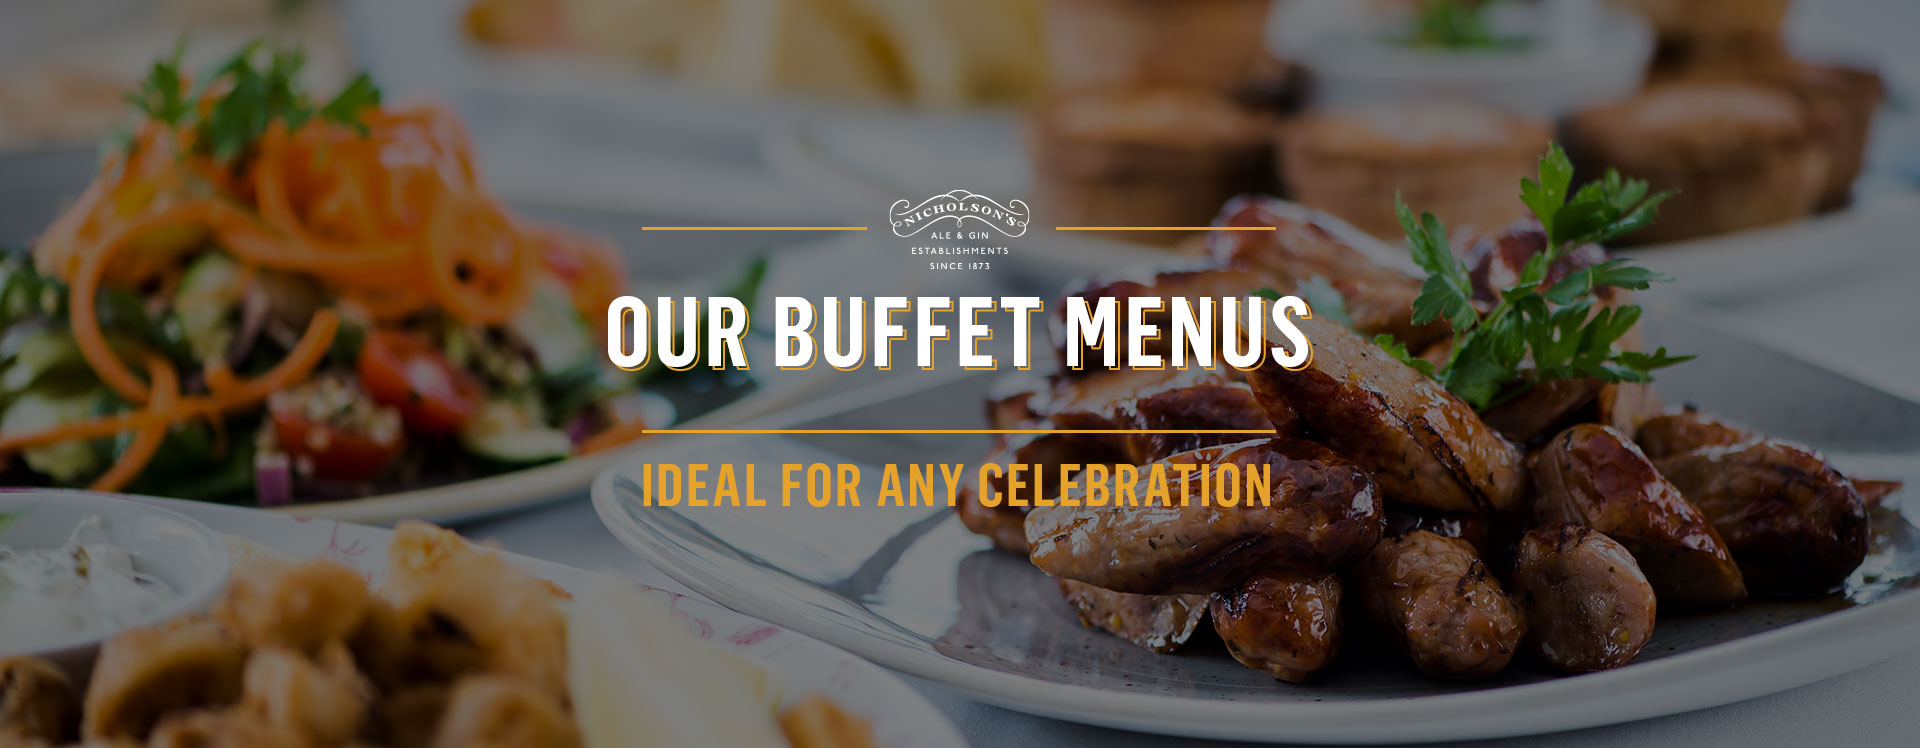 Buffet menu at The Chequers - Book a table